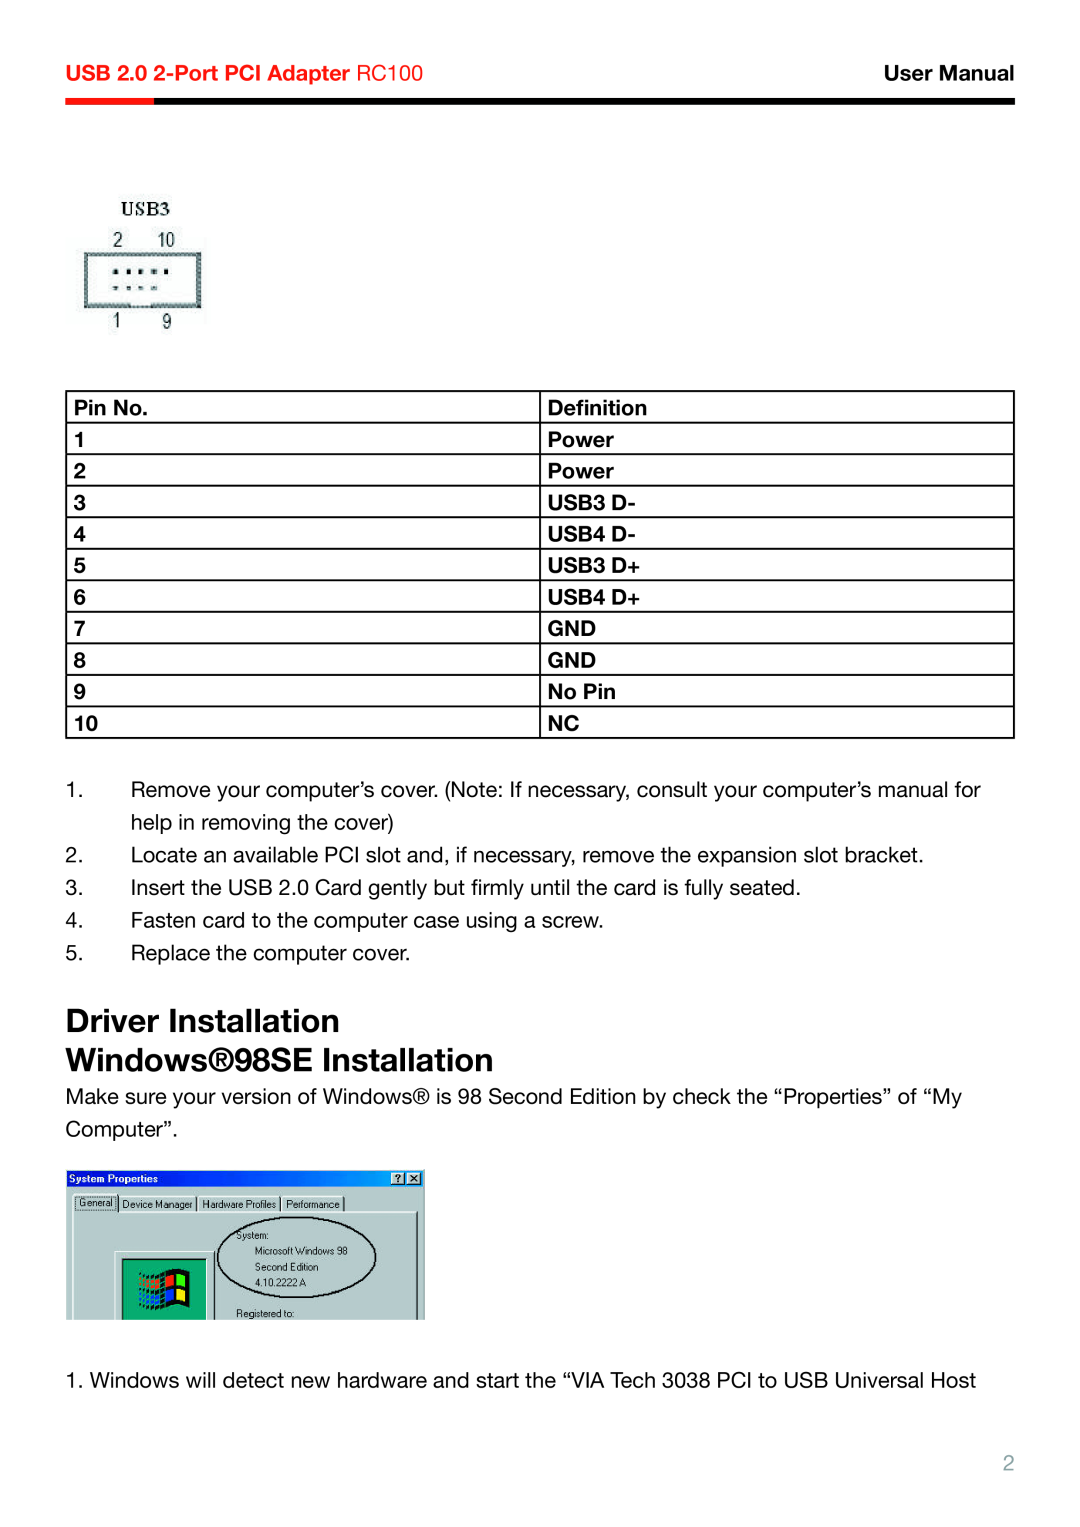 Rosewill RC-100 Driver Installation Windows98SE Installation, Pin No, Deﬁnition, Power, USB3 D+, USB4 D+, No Pin 